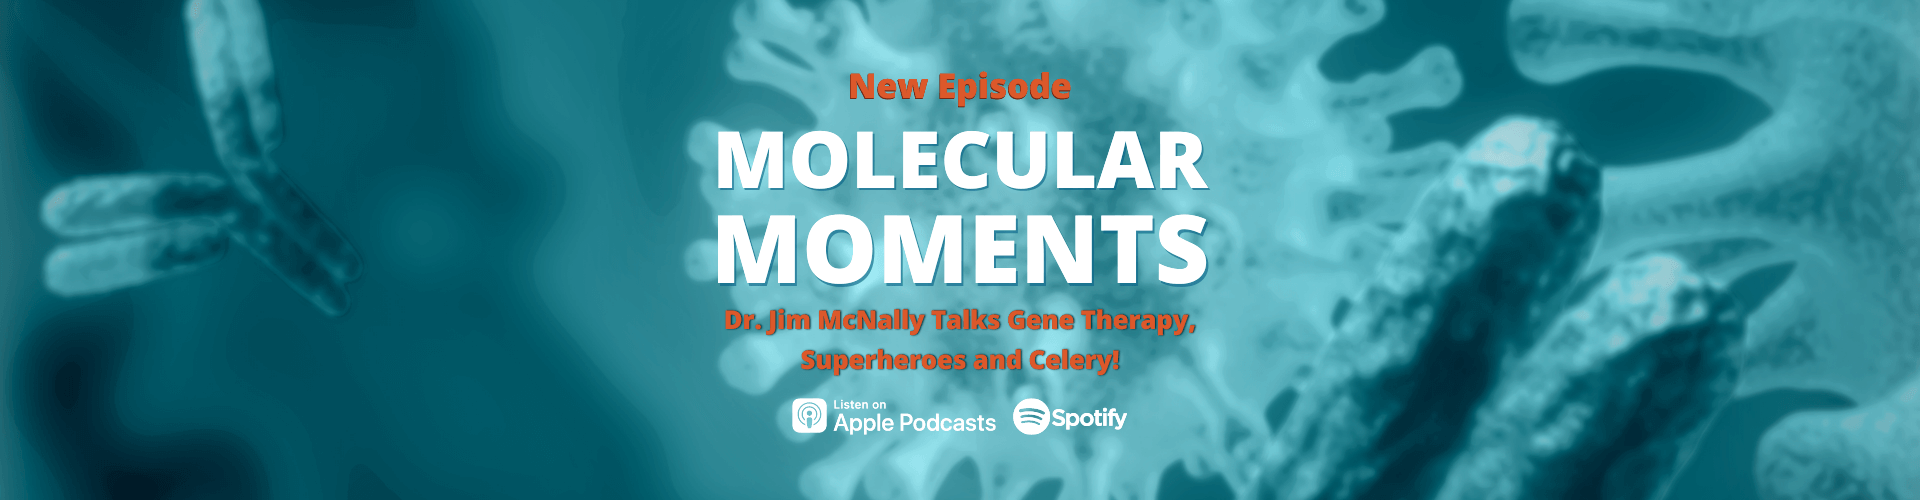 [EPISODE 1] Dr. Jim McNally Talks Gene Therapy, Superheroes and Celery!